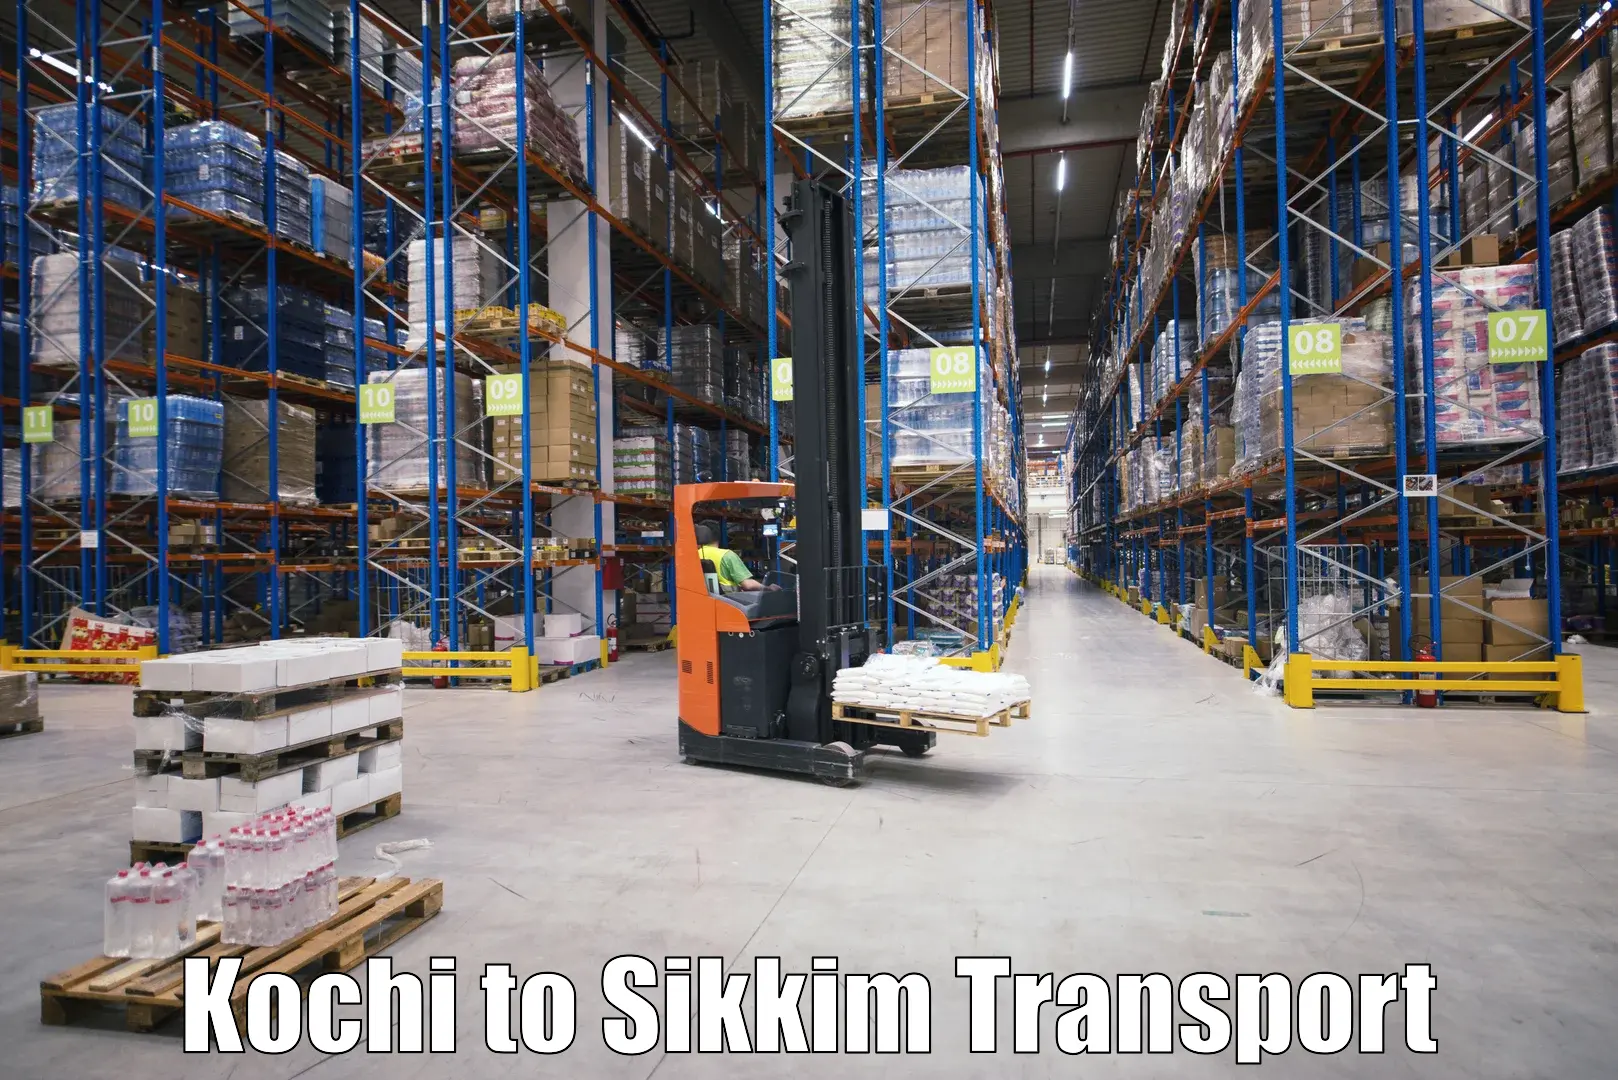 Daily transport service Kochi to East Sikkim